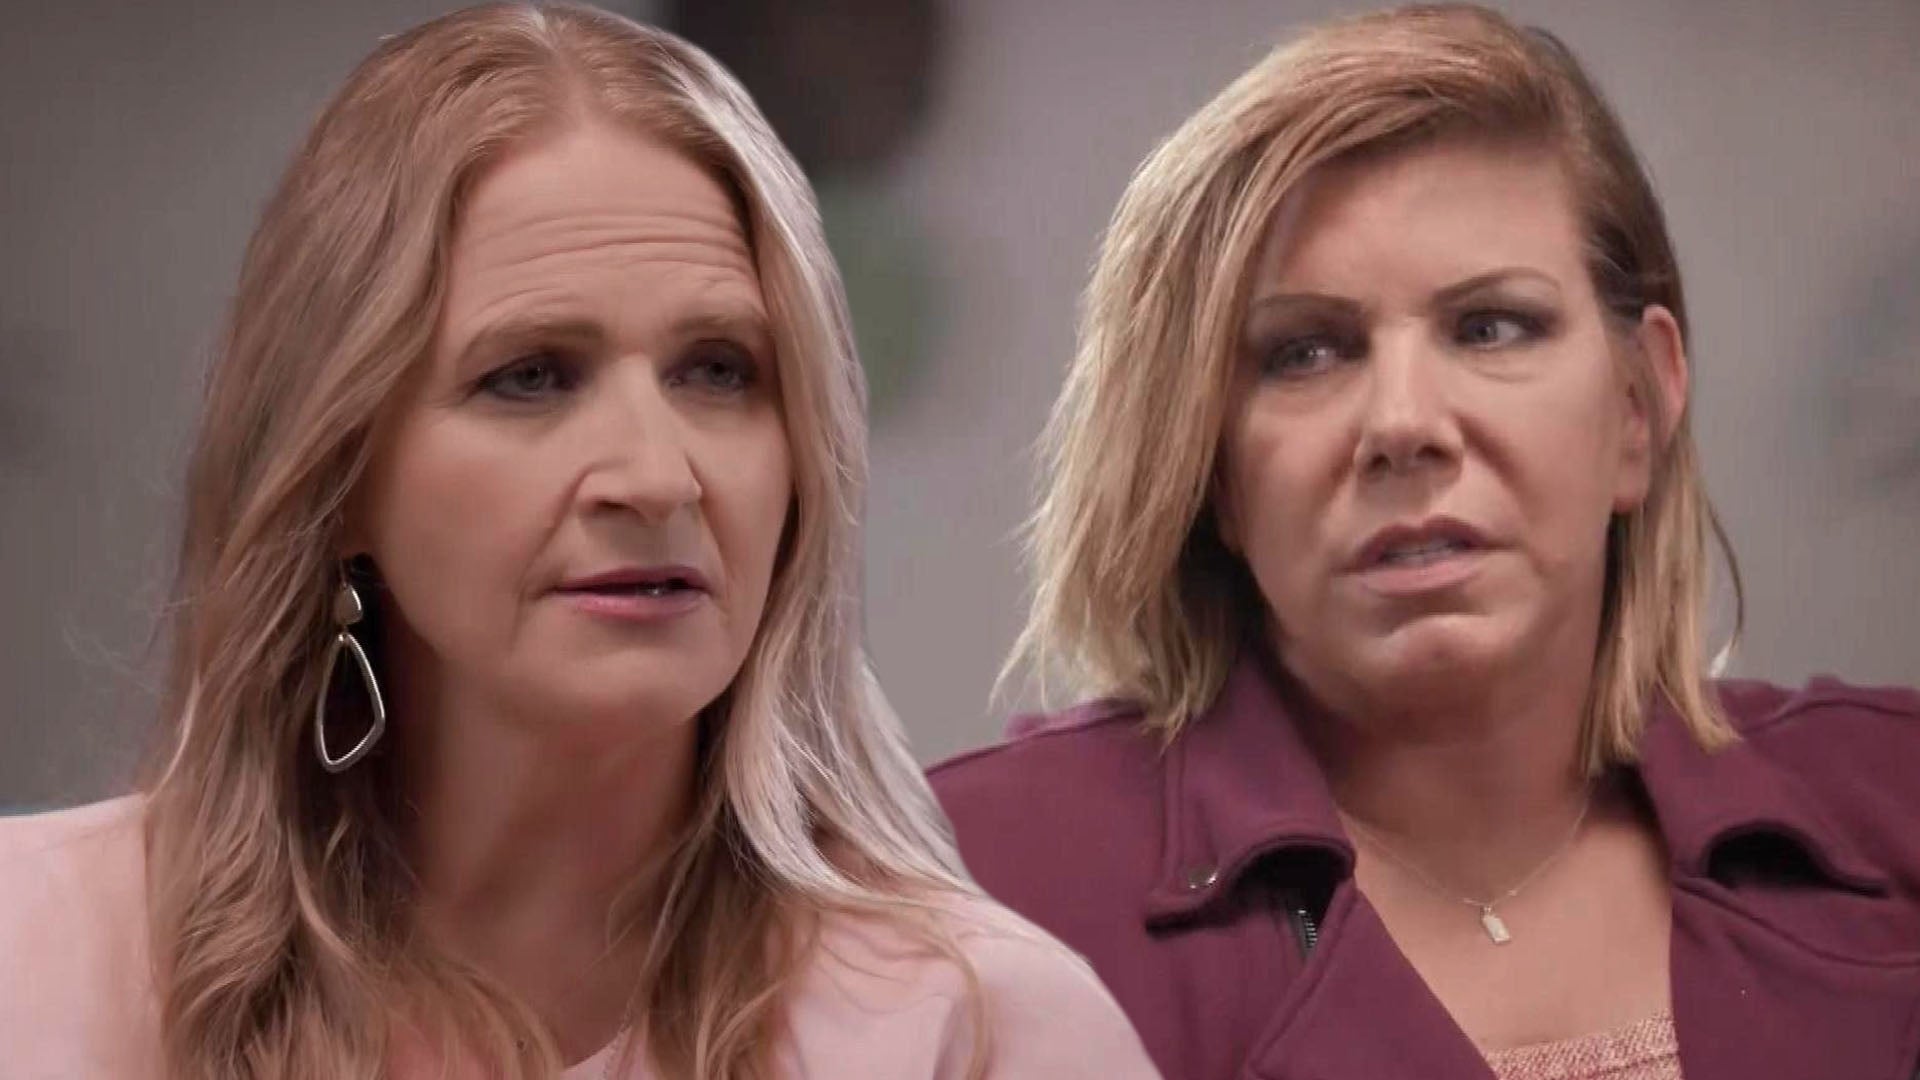 'Sister Wives': Christine Explains Why She Ended Friendship With Meri